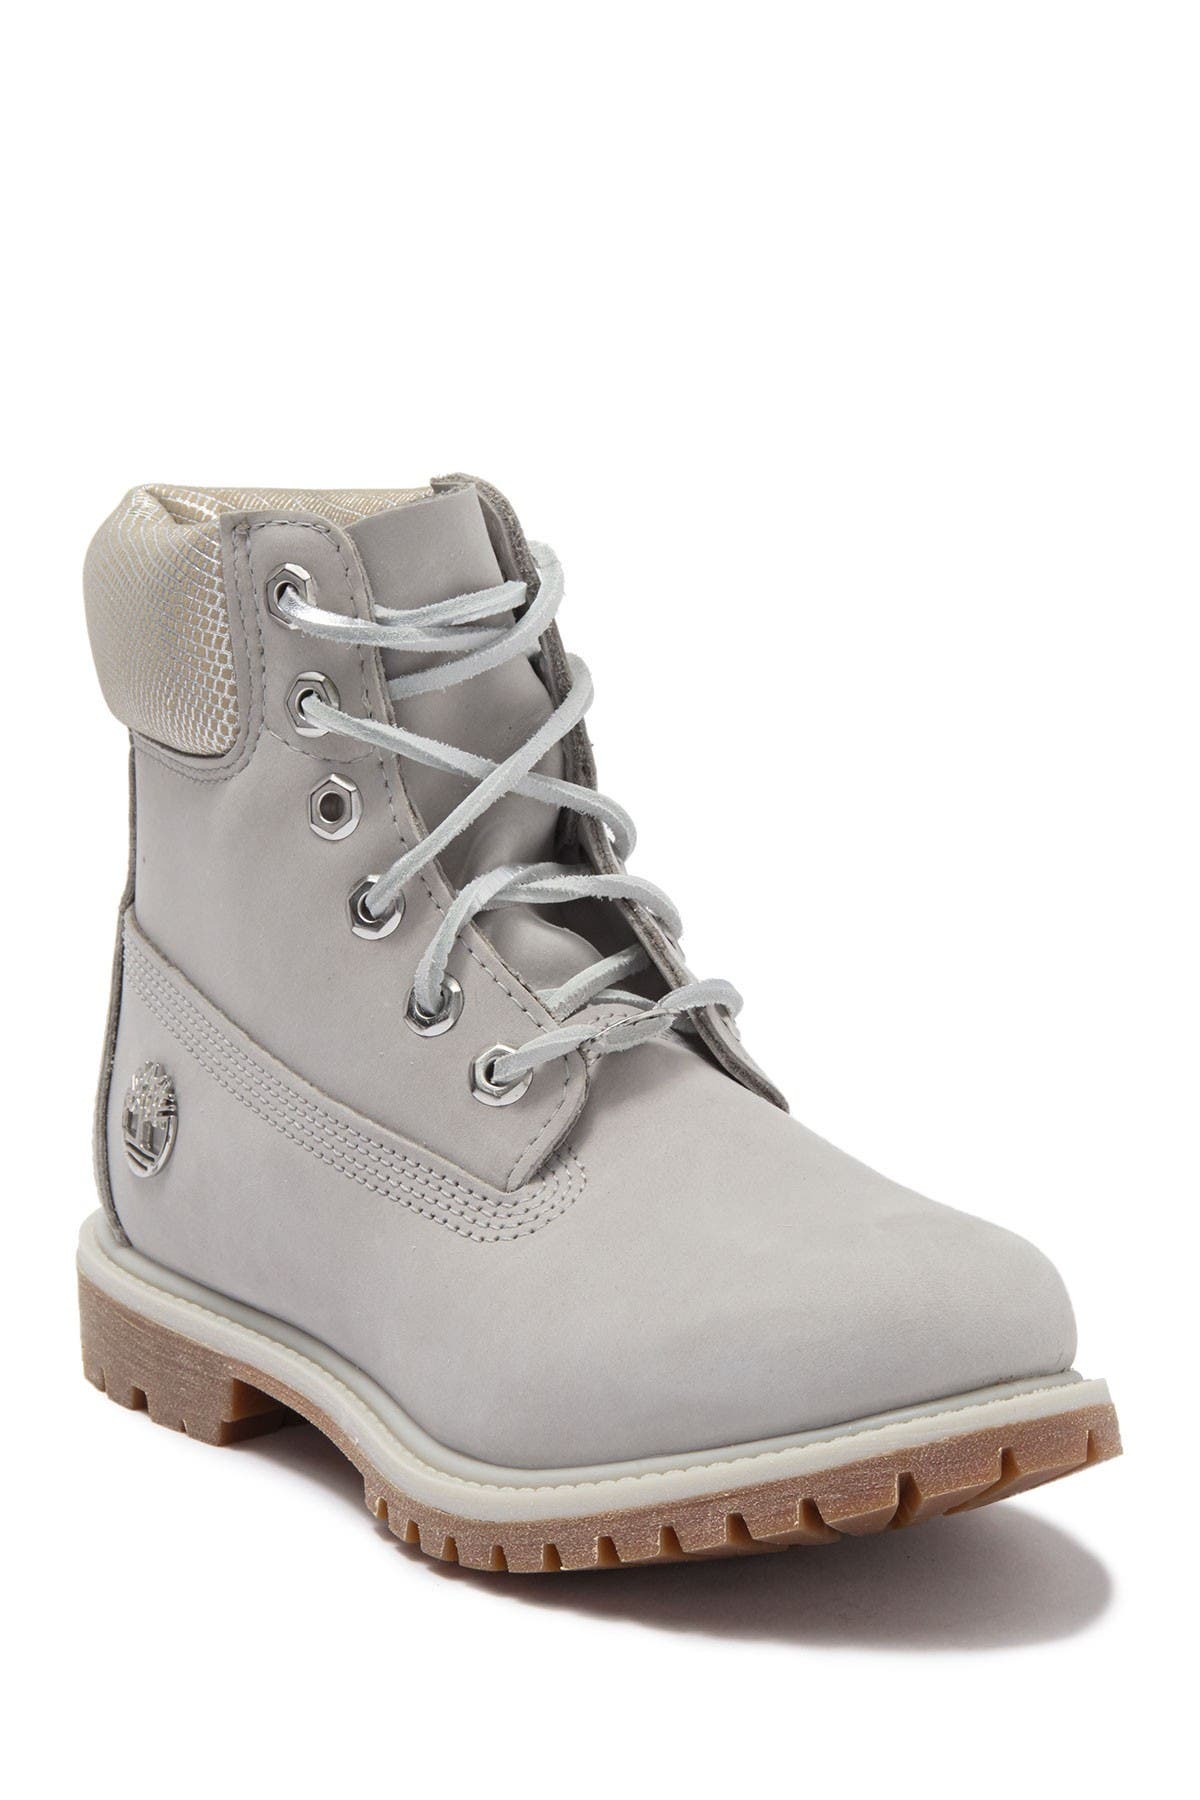 nordstrom rack timberland boots